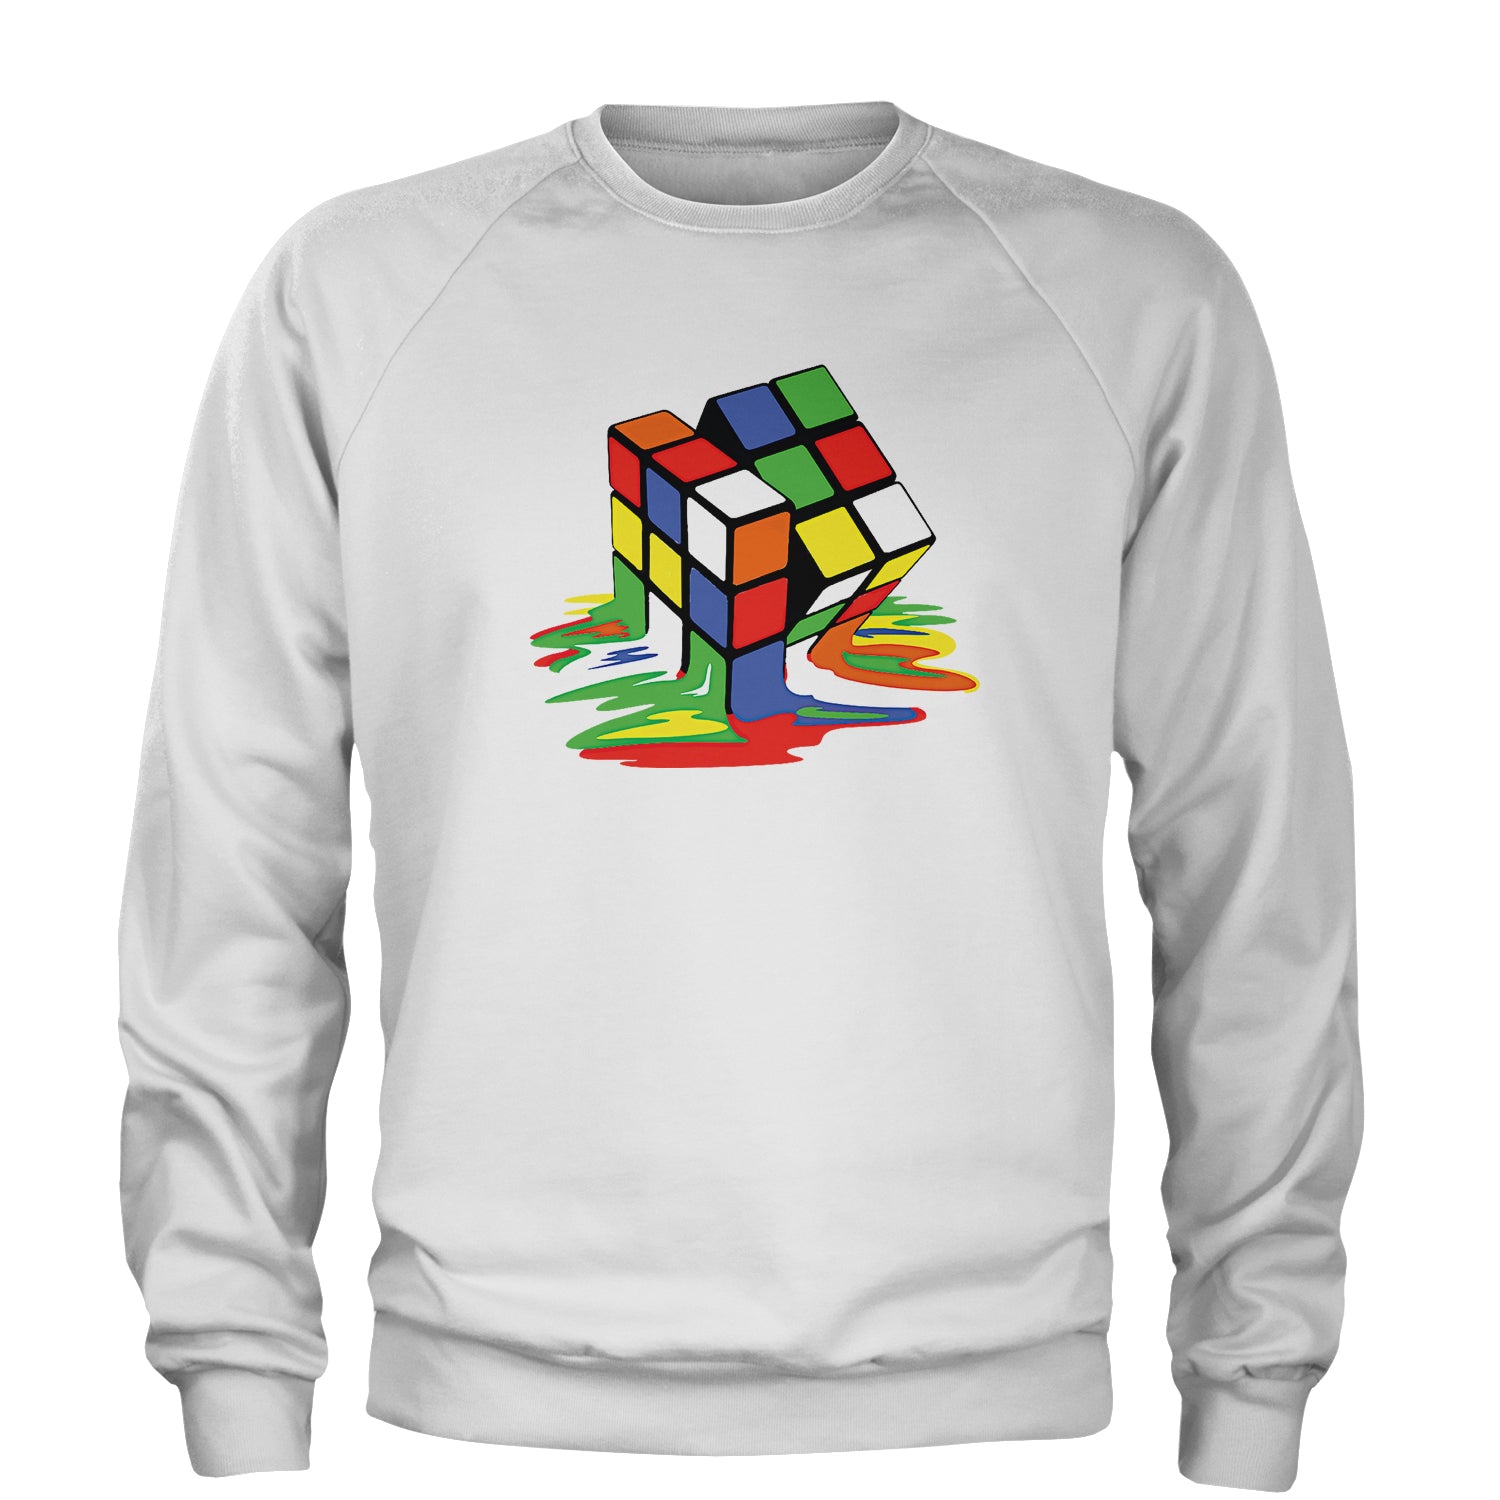 Melting Multi-Colored Cube Adult Crewneck Sweatshirt gamer, gaming, nerd, shirt by Expression Tees